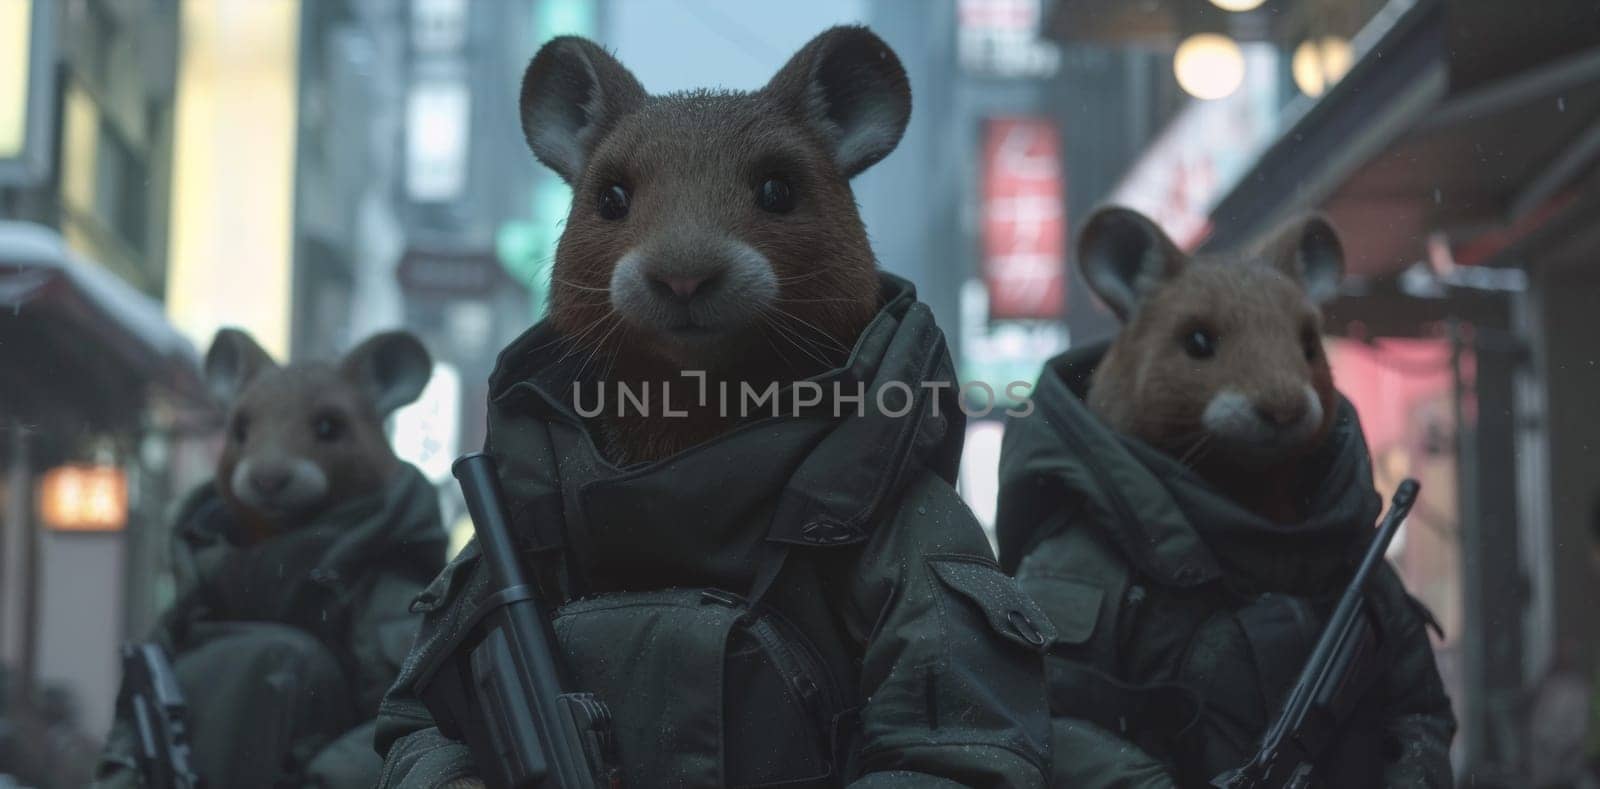 Three rats in military gear with guns walking down a street